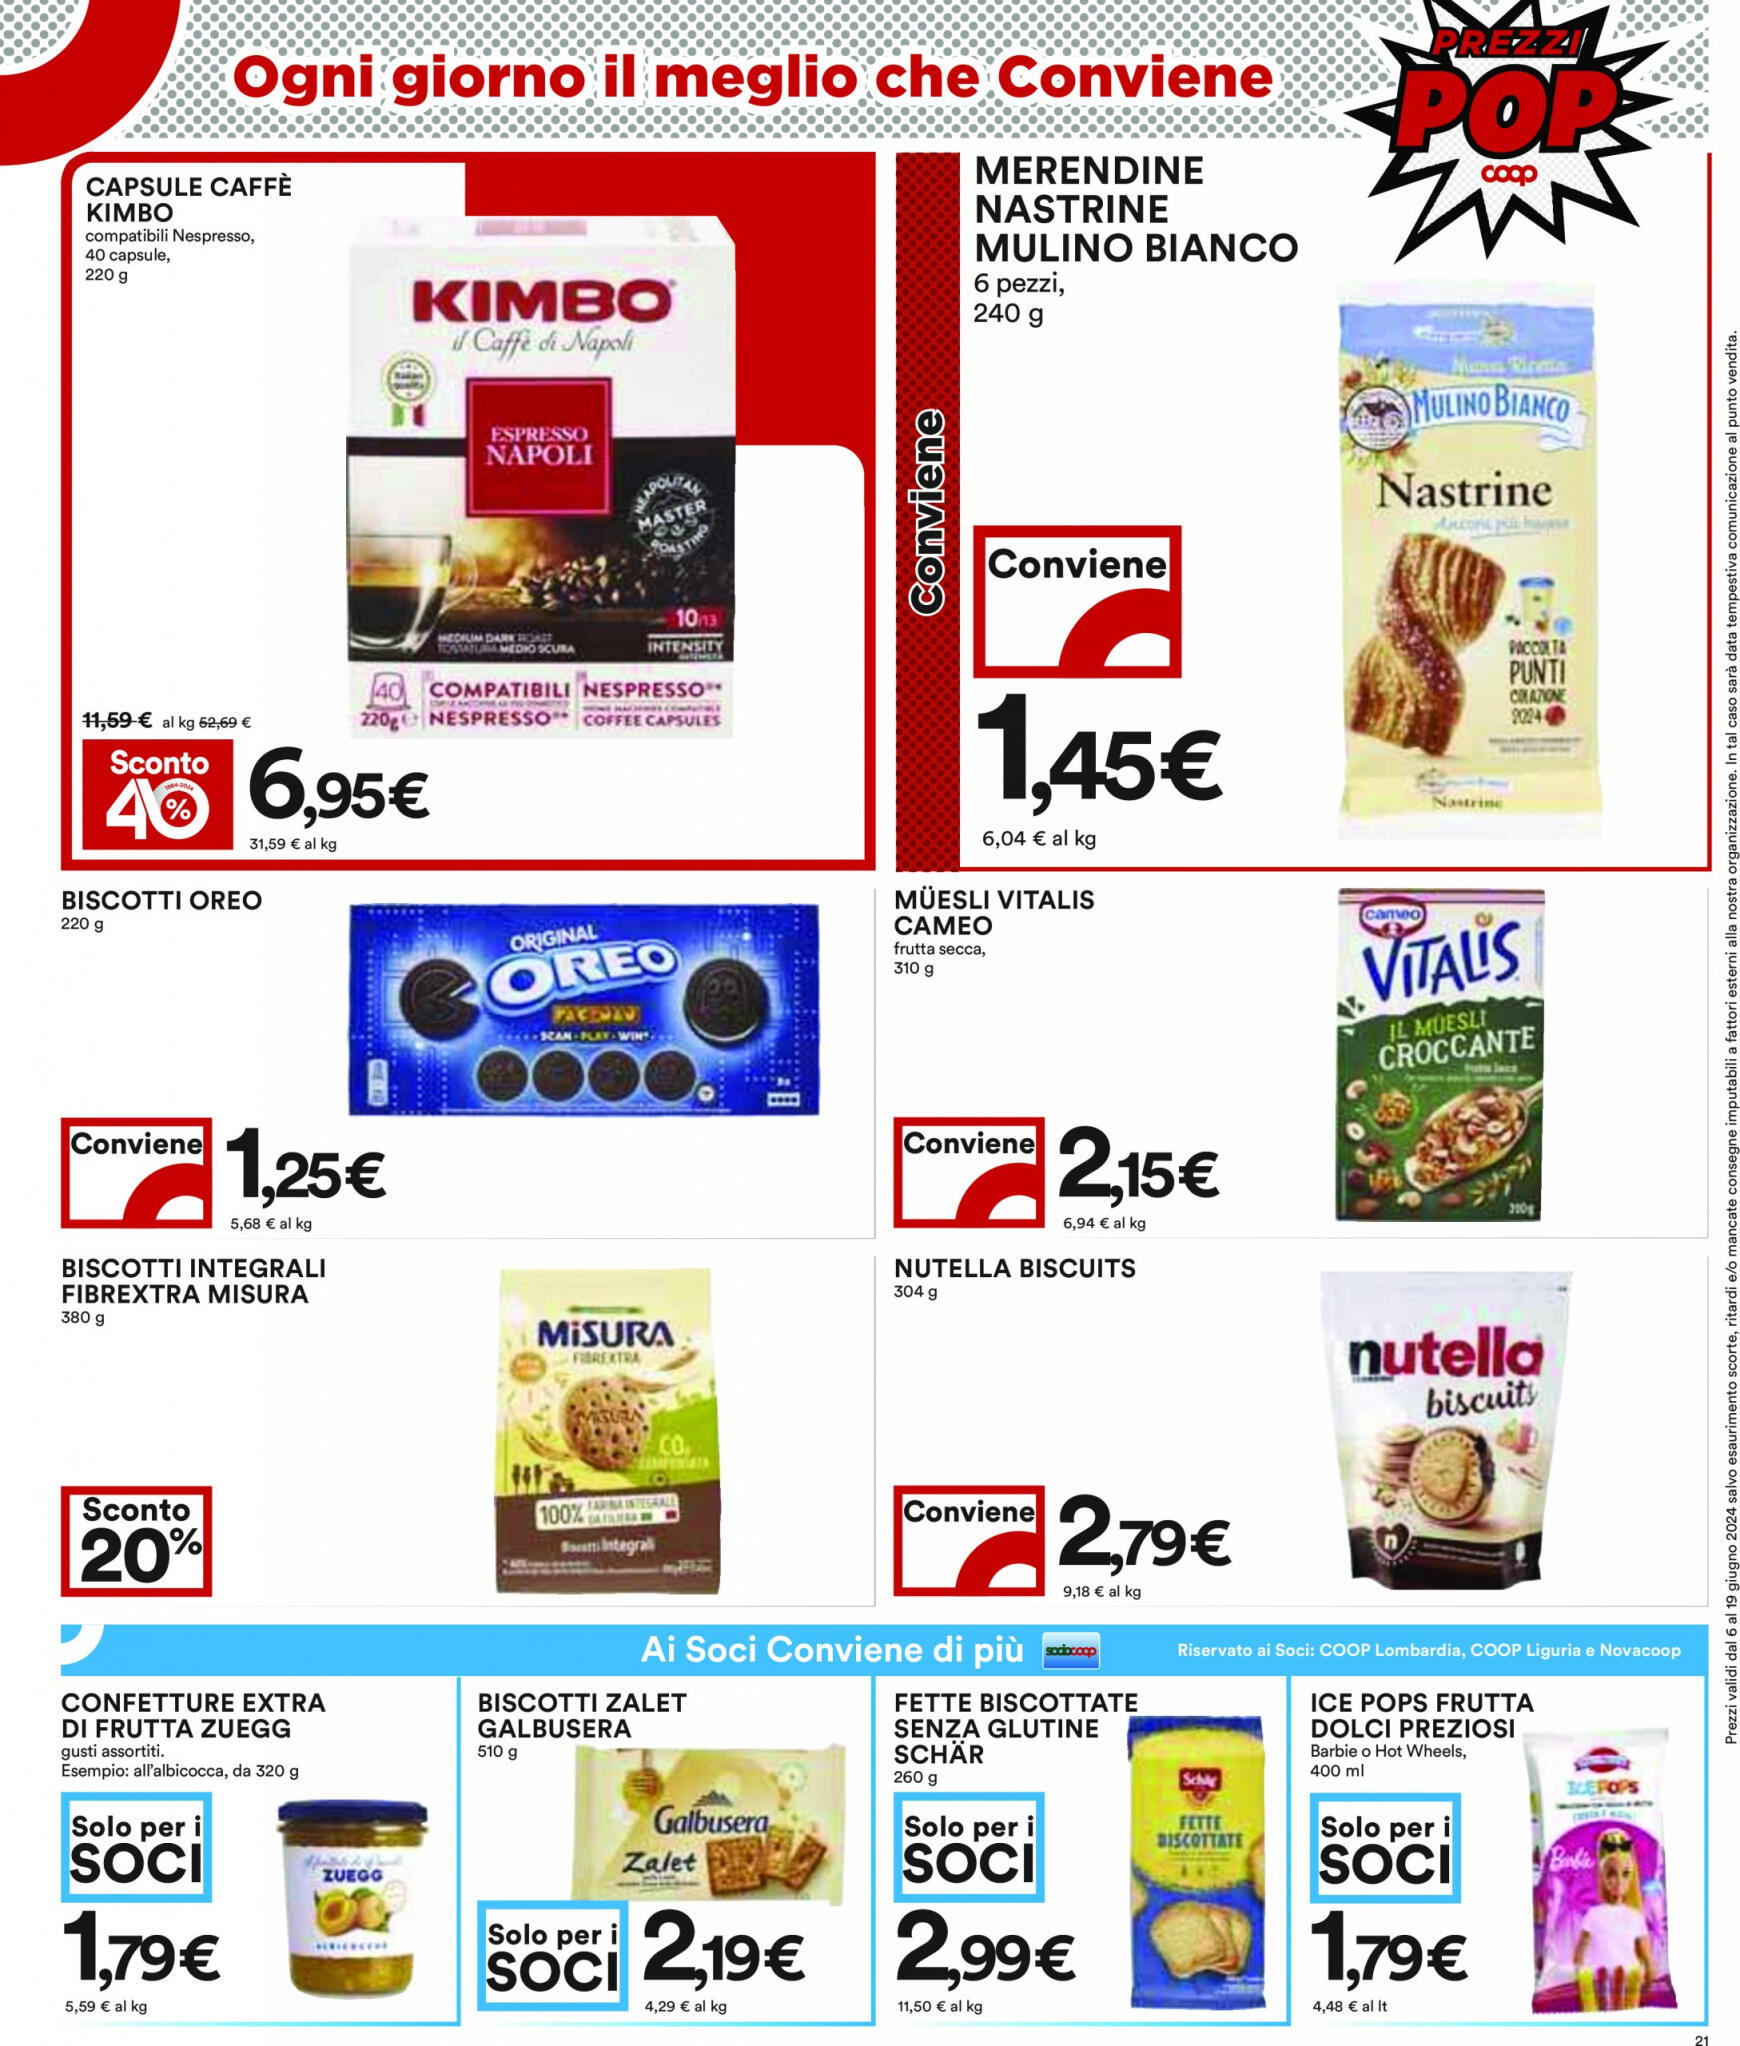 coop - Nuovo volantino Coop 10.06. - 19.06. - page: 21